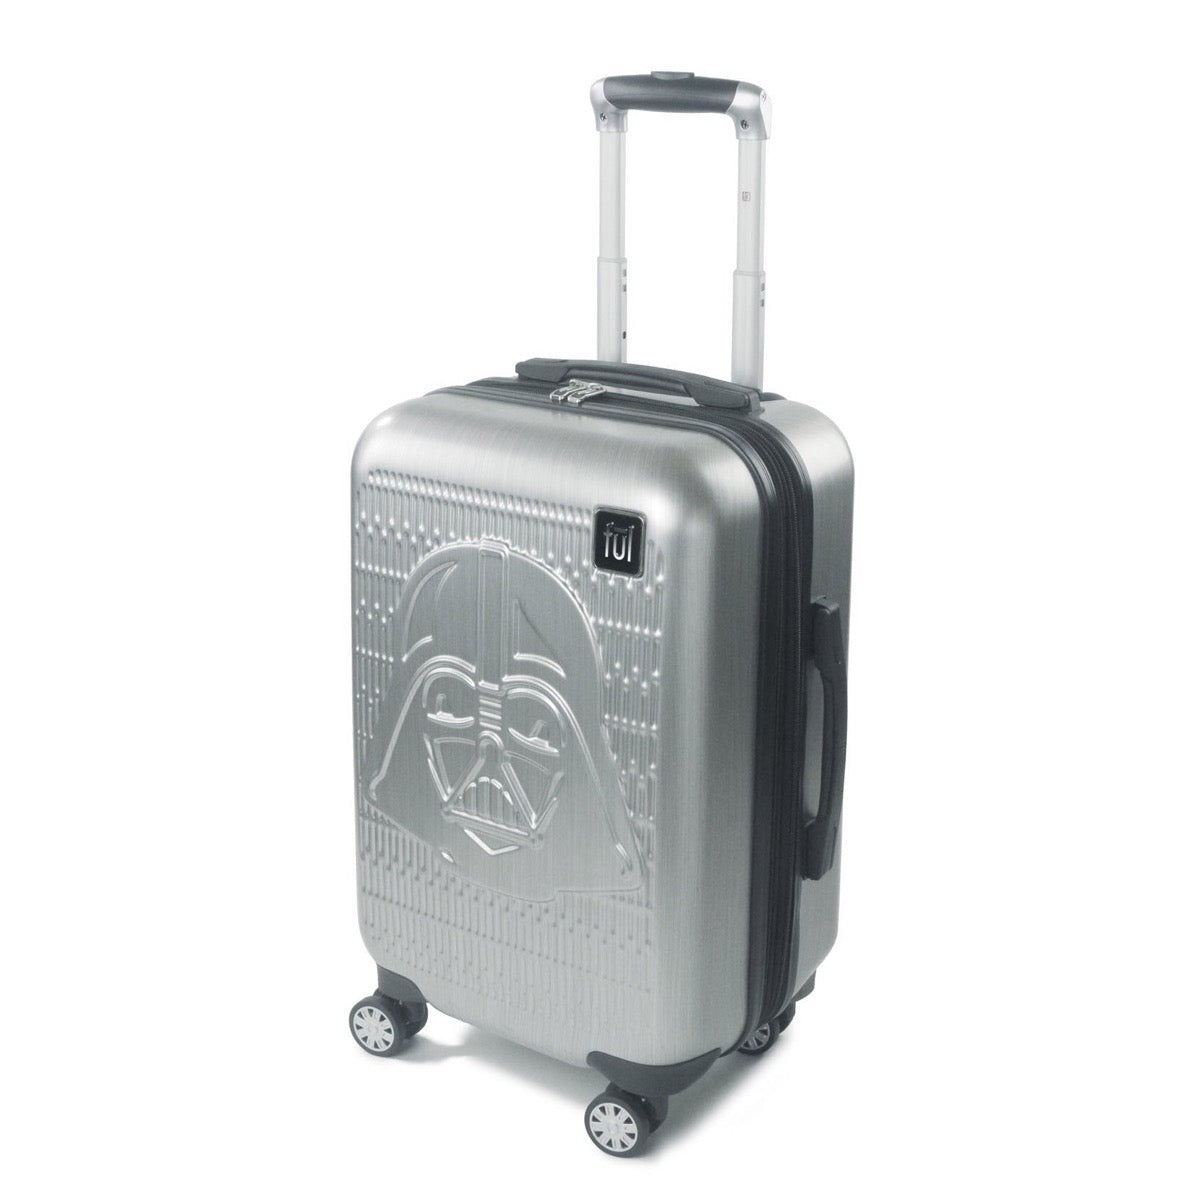 Ful Disney Star Wars Darth Vader 21-inch carry-on spinner suitcase affordable luggage silver